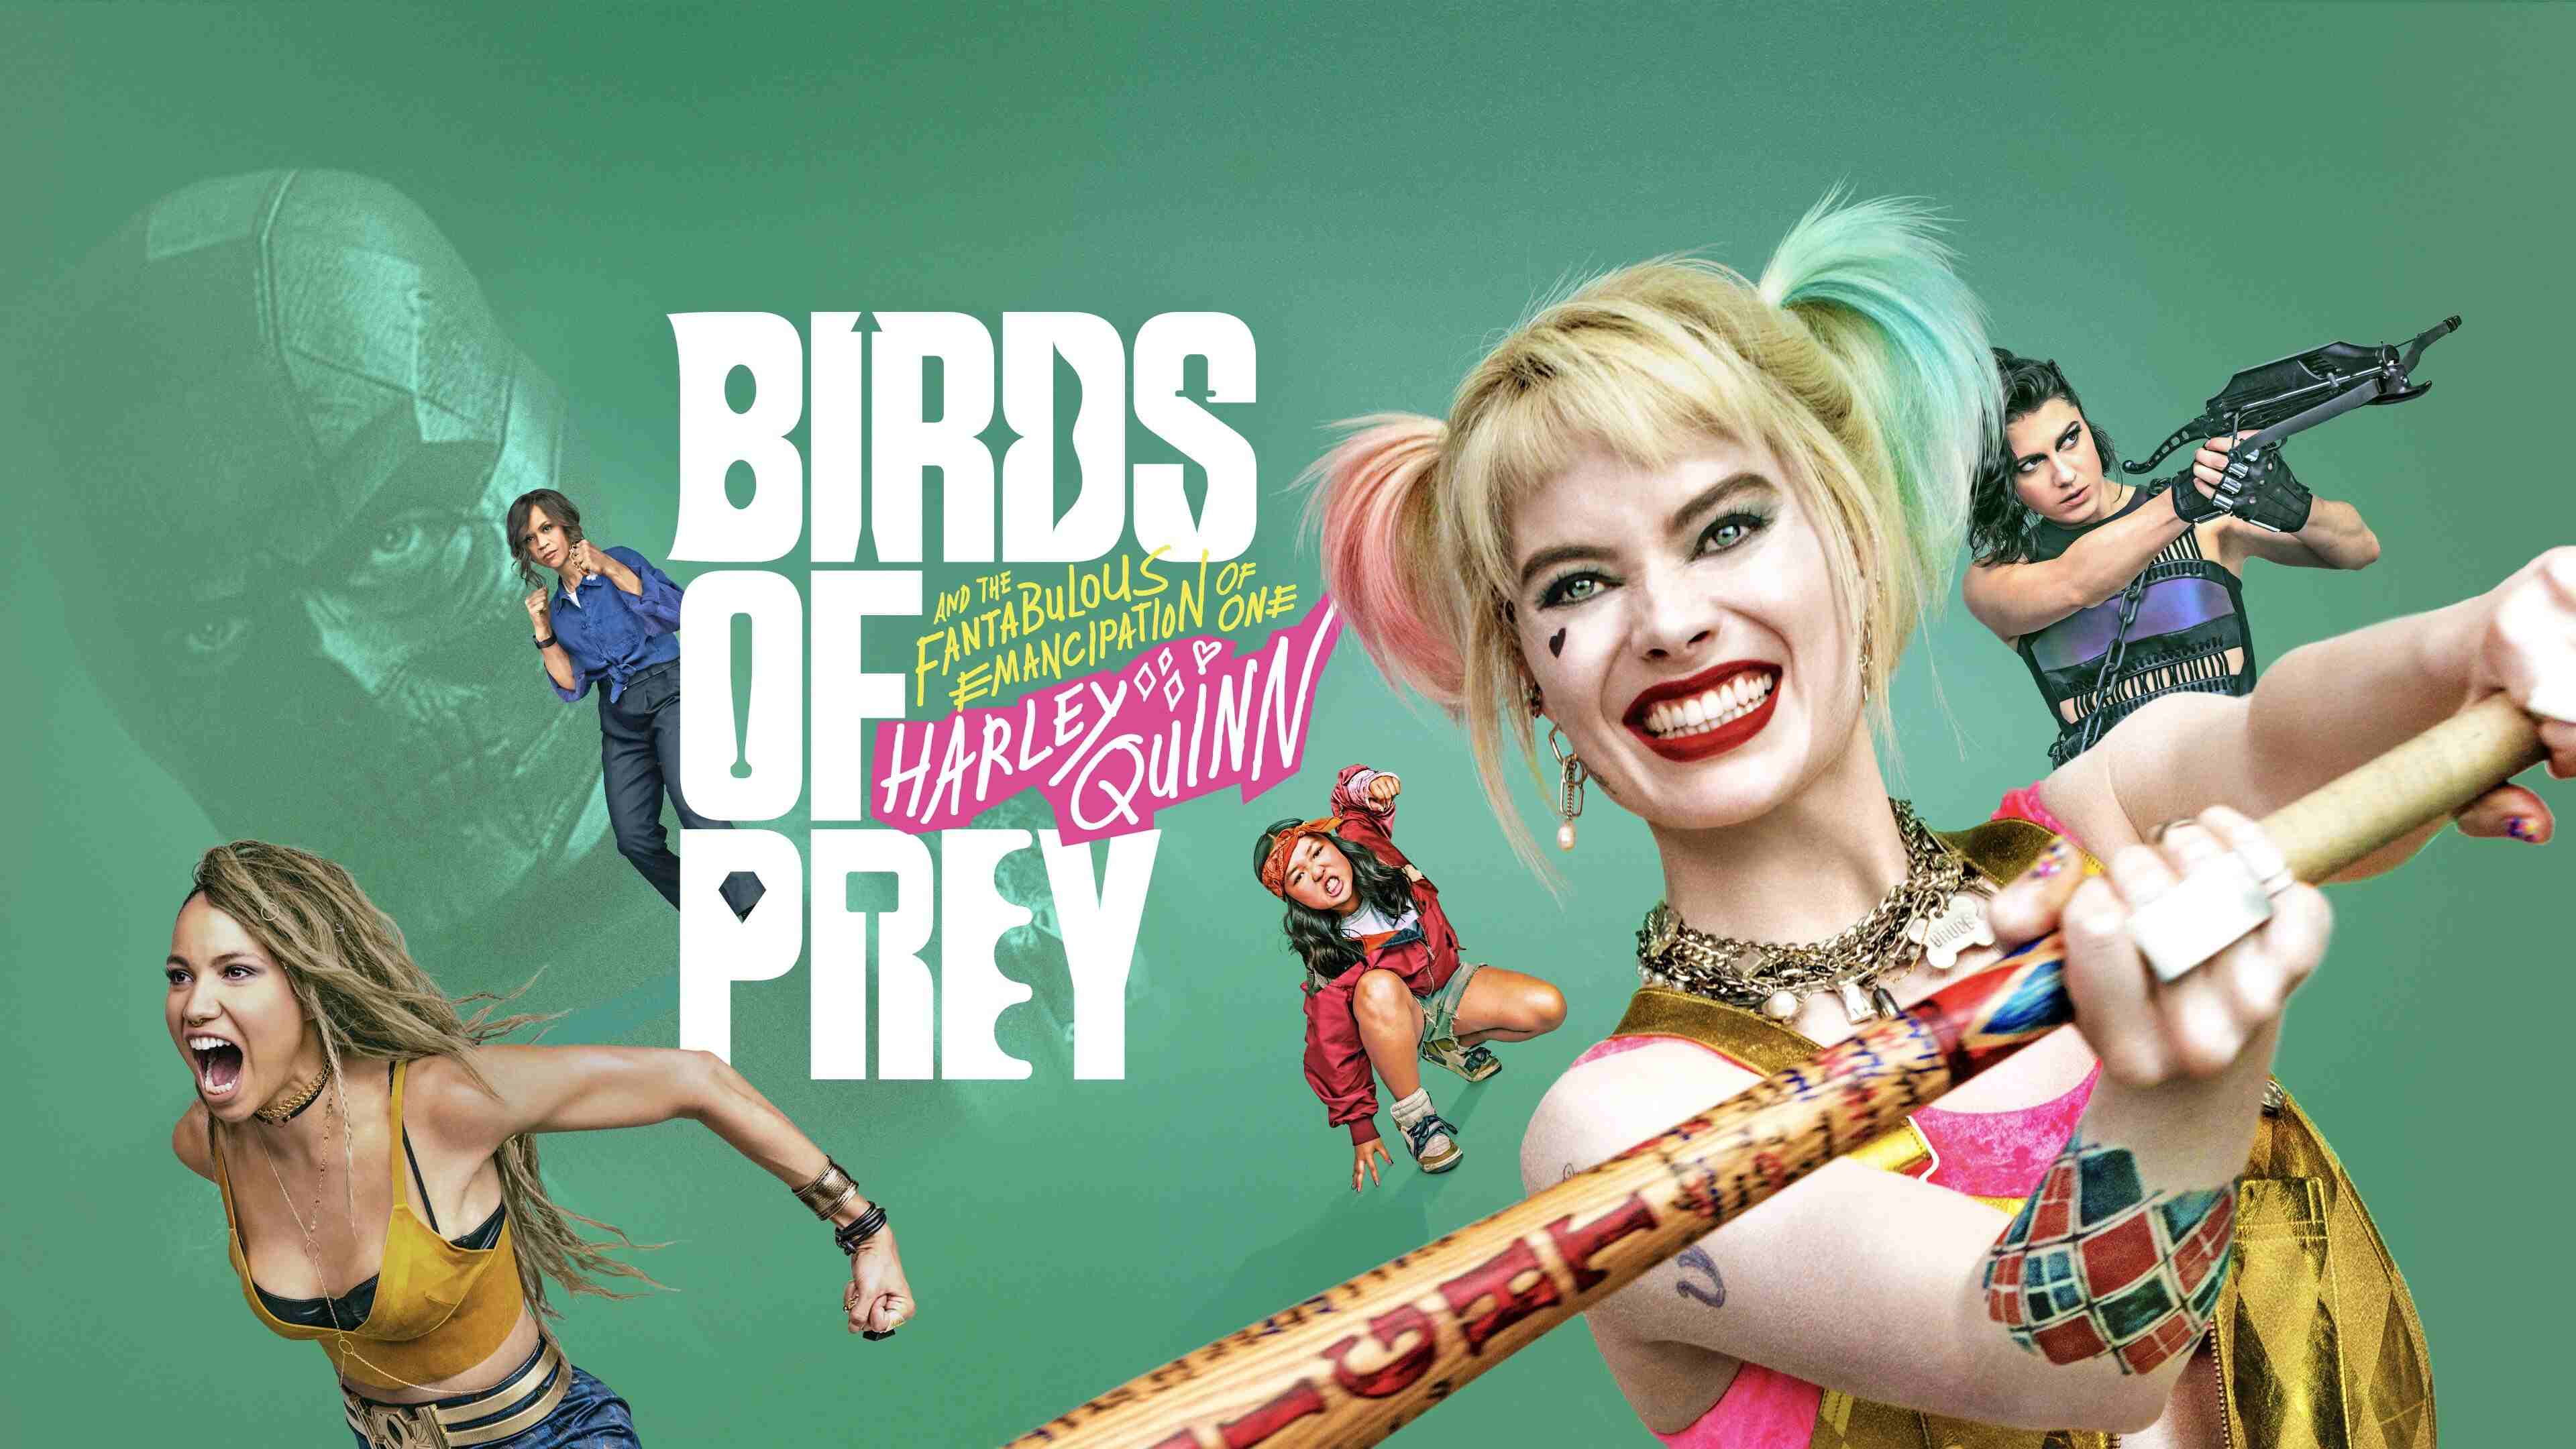 47-facts-about-the-movie-birds-of-prey-and-the-fantabulous-emancipation-of-one-harley-quinn